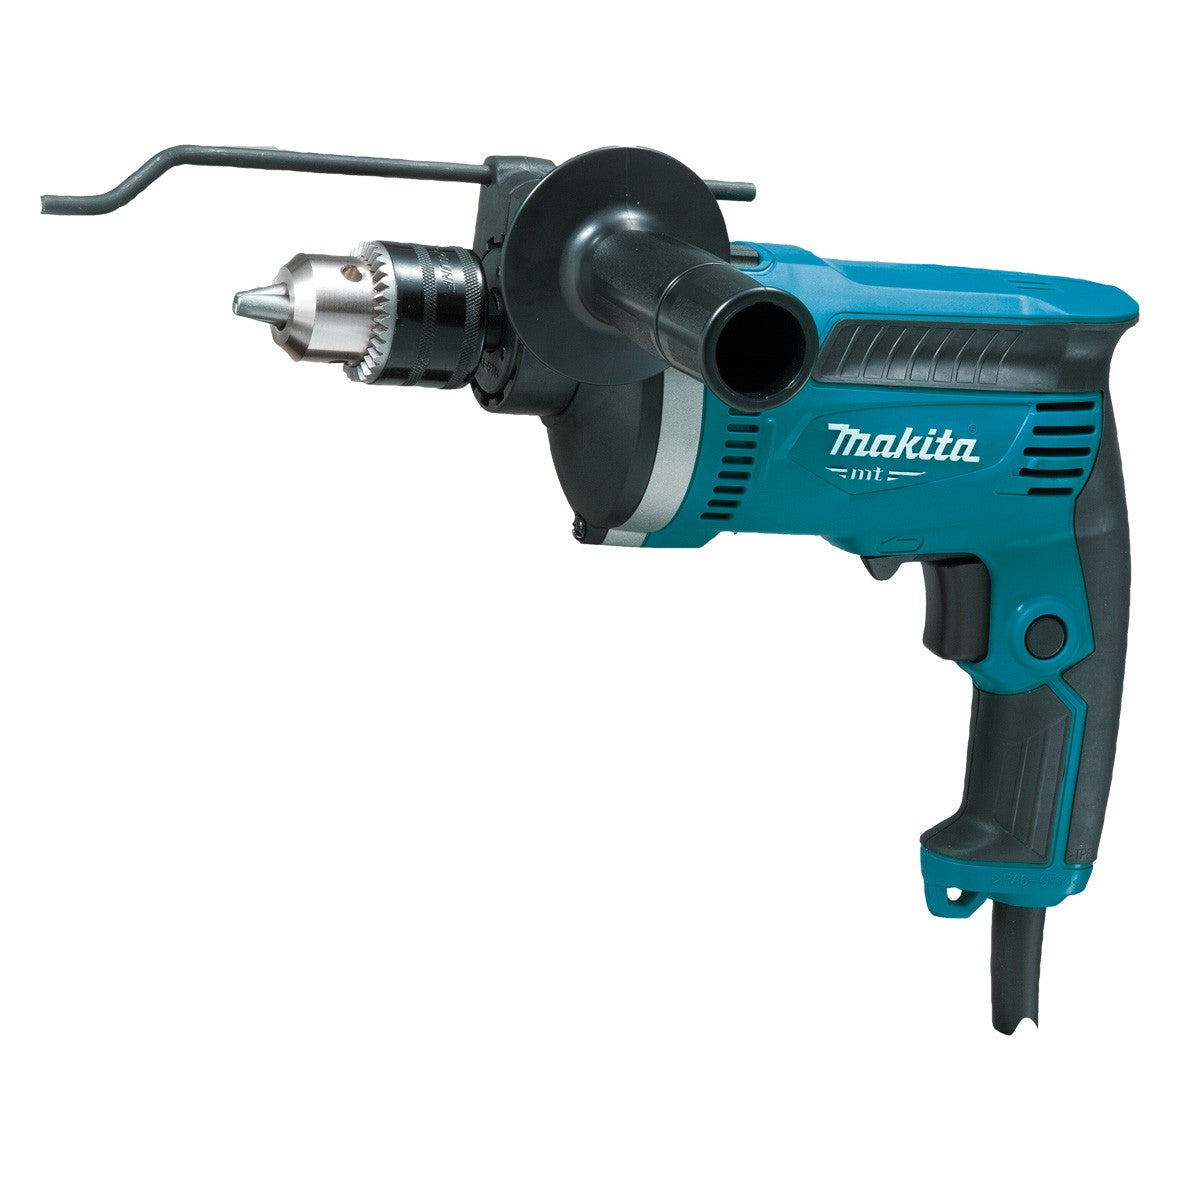 MT Series 16mm (5/8") Hammer Drill with Carry Case M8100KG by Makita